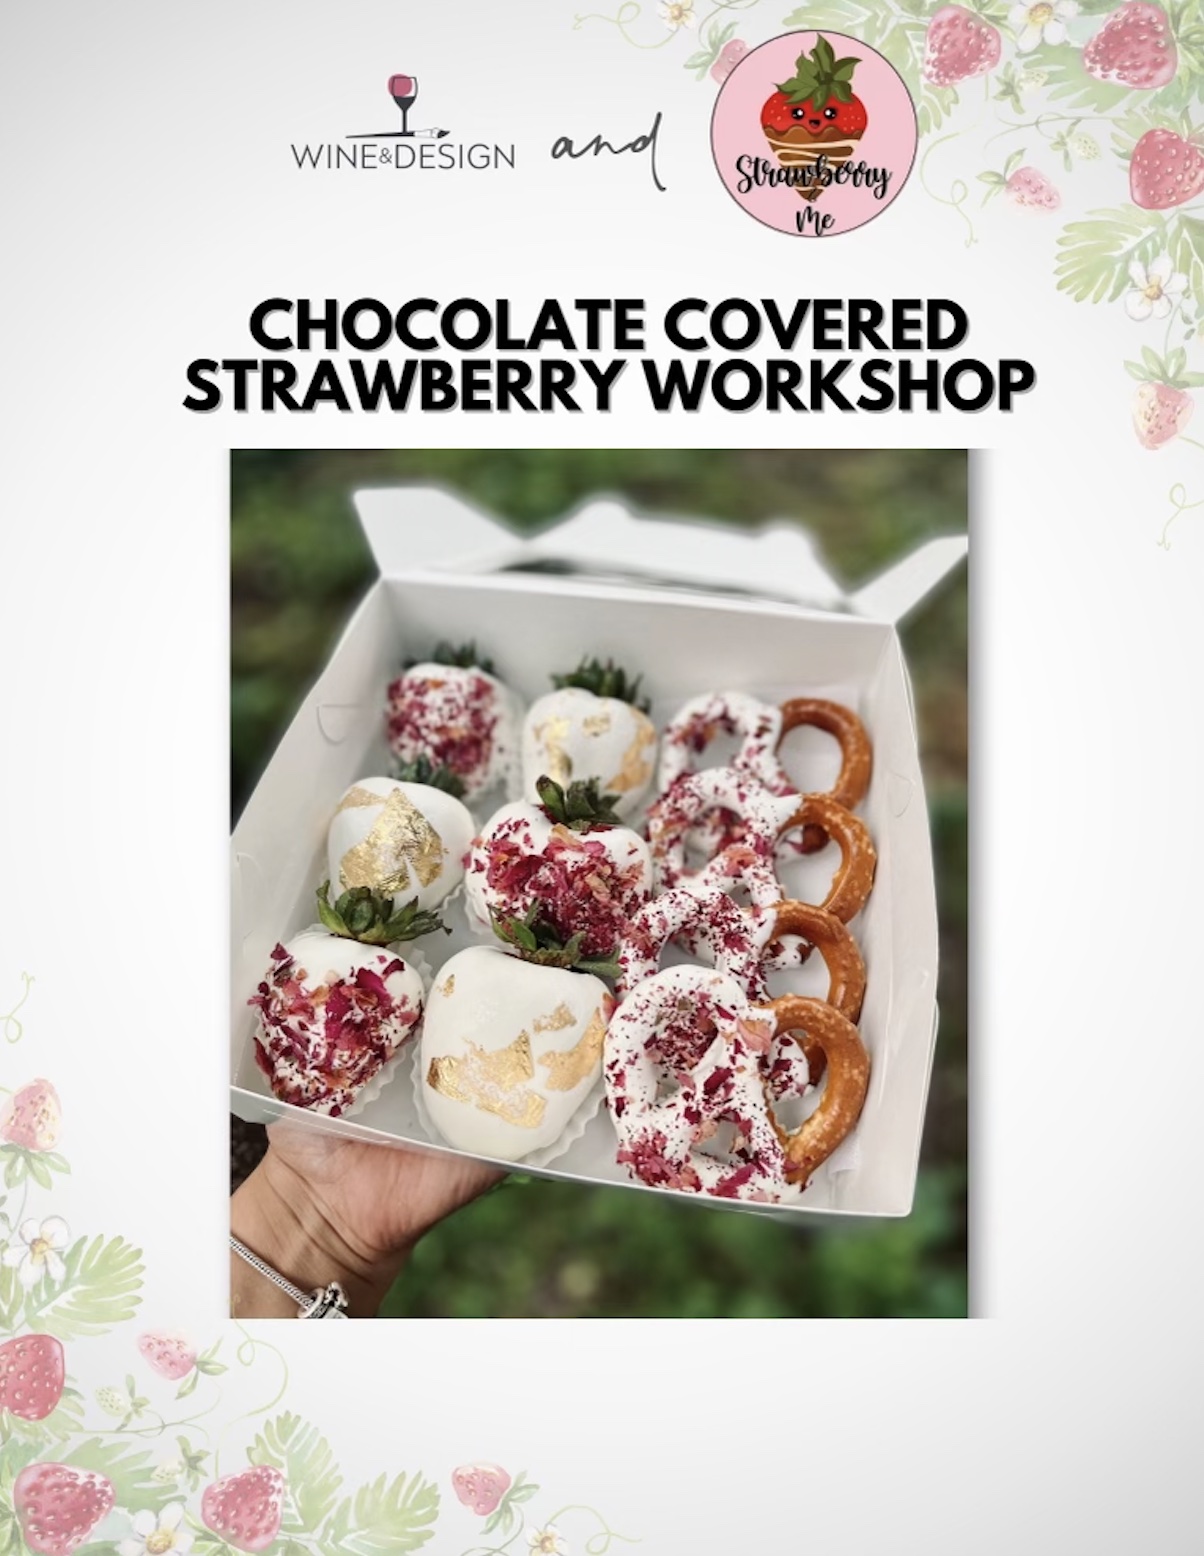 Chocolate Covered Strawberries Workshop with Strawberry & Me!